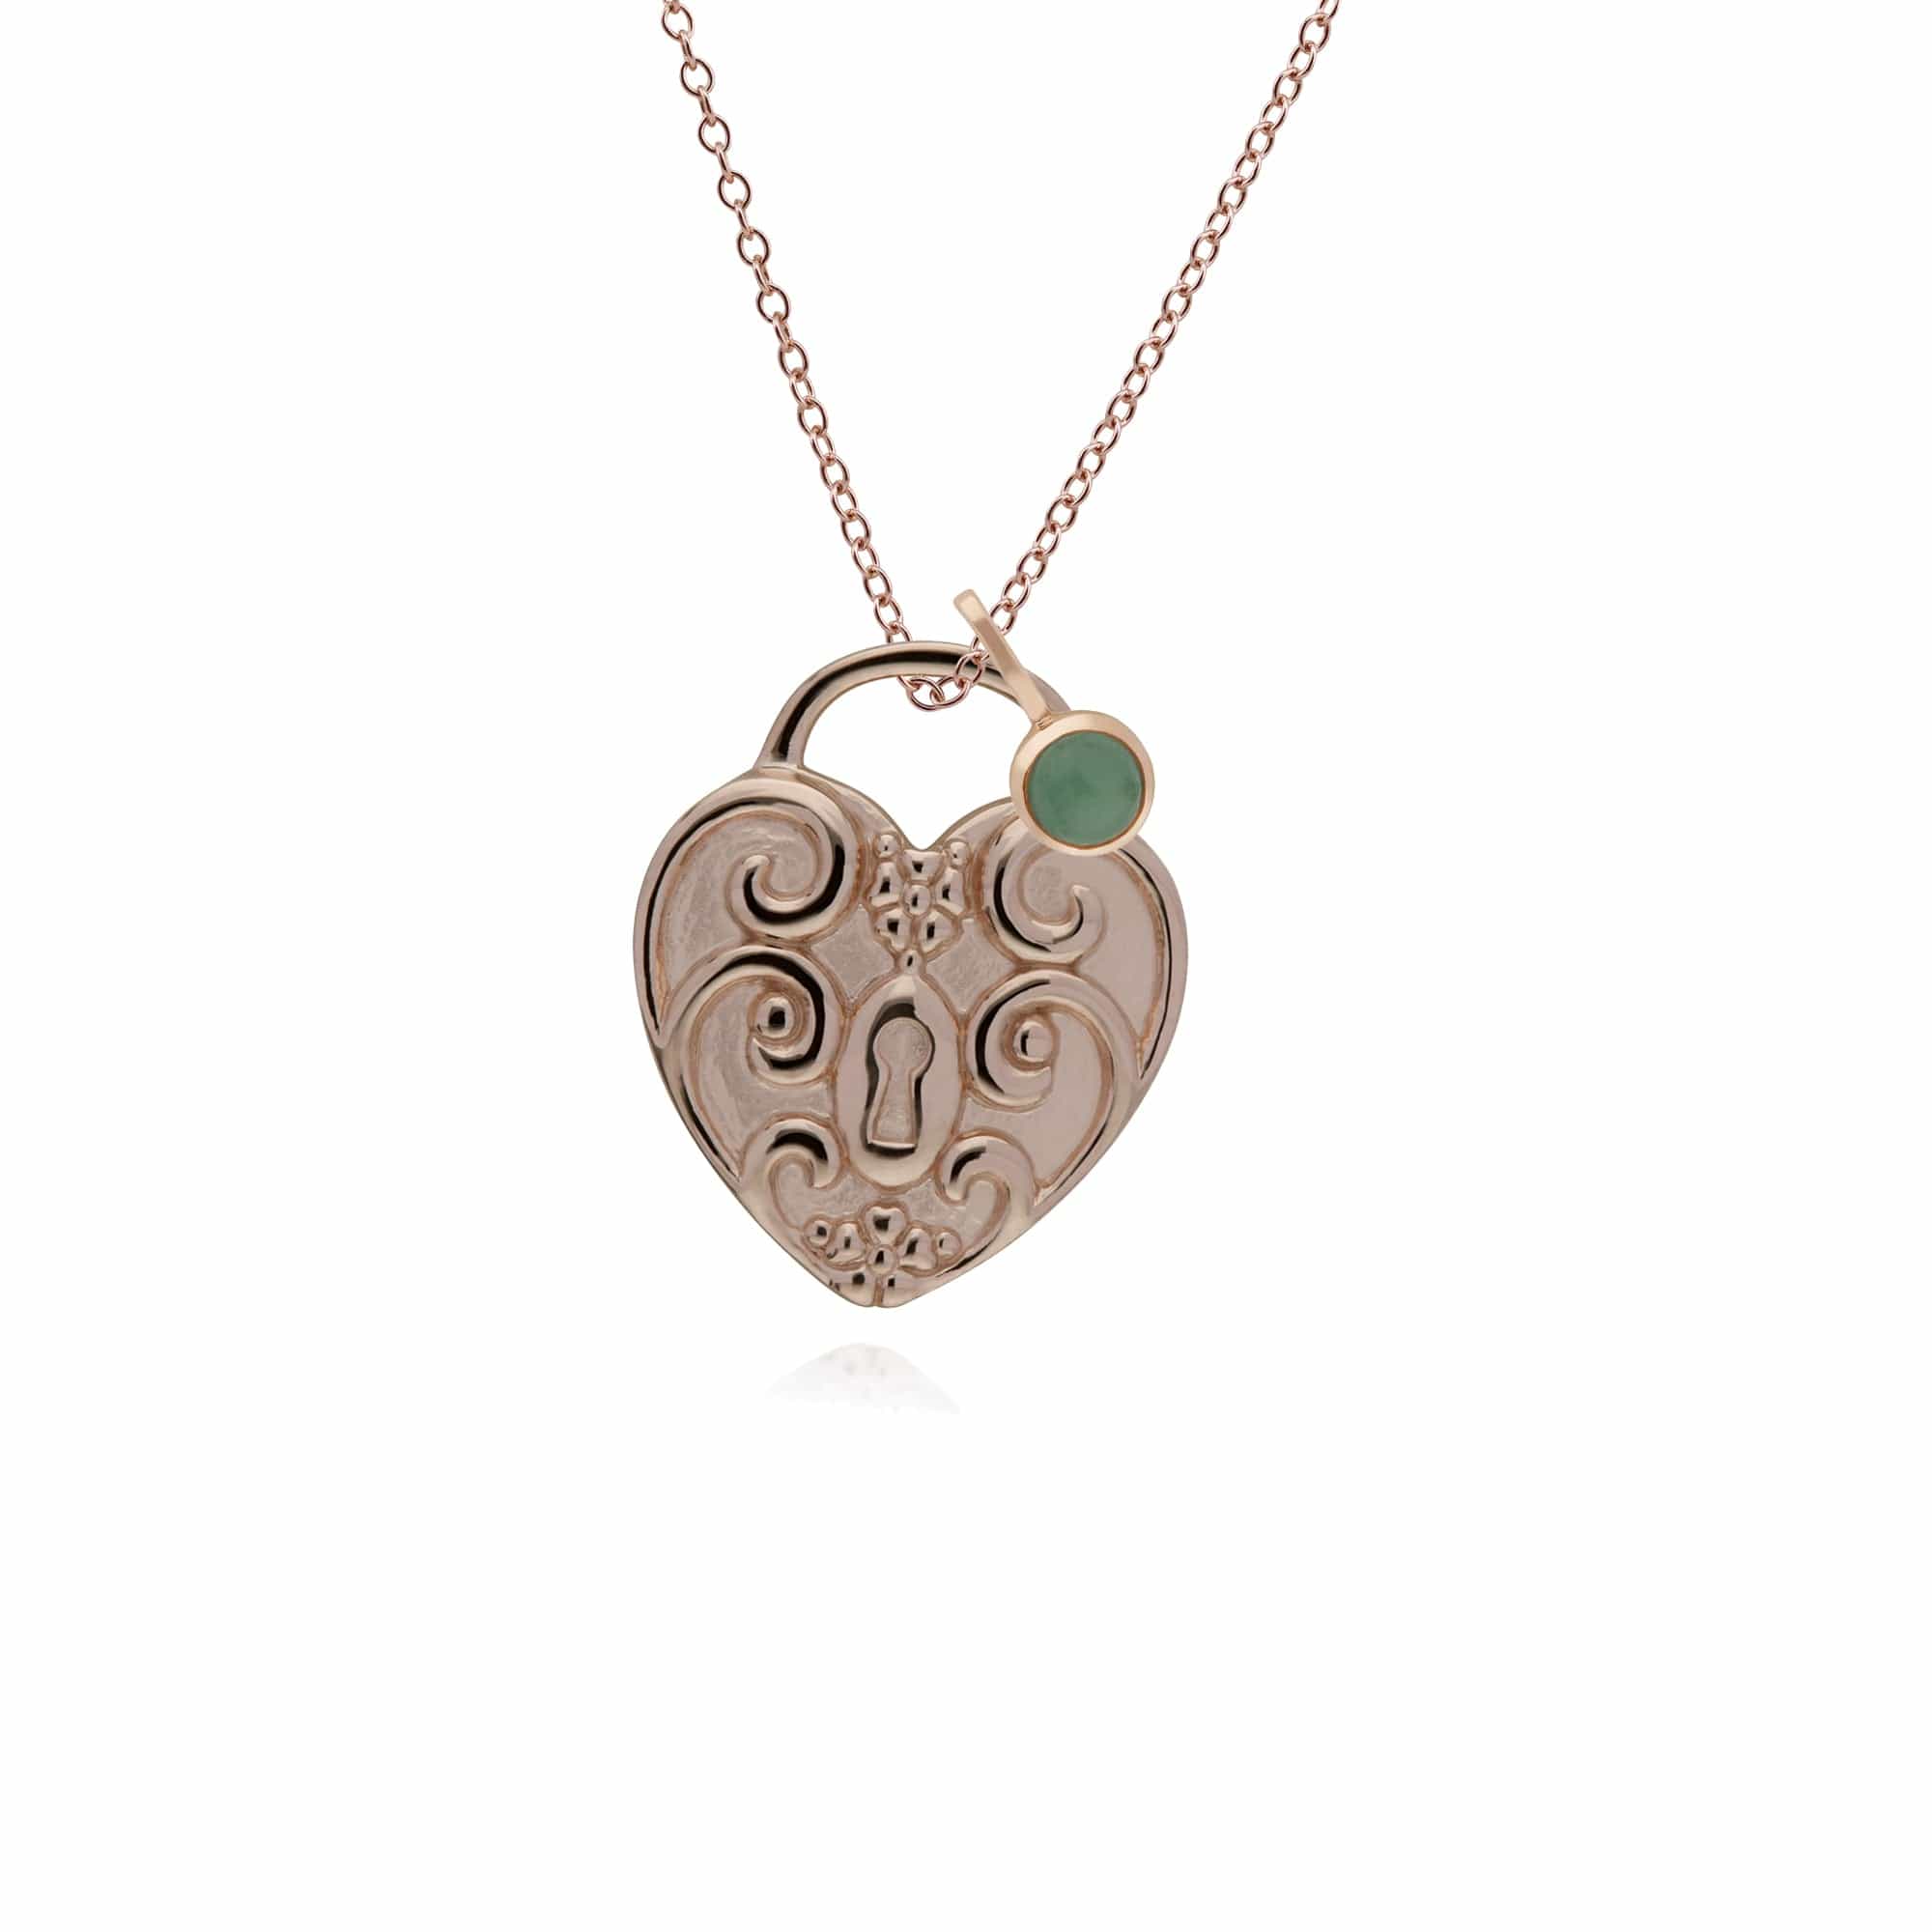 270P025904925-270P026501925 Classic Swirl Heart Lock Pendant & Jade Charm in Rose Gold Plated 925 Sterling Silver 1